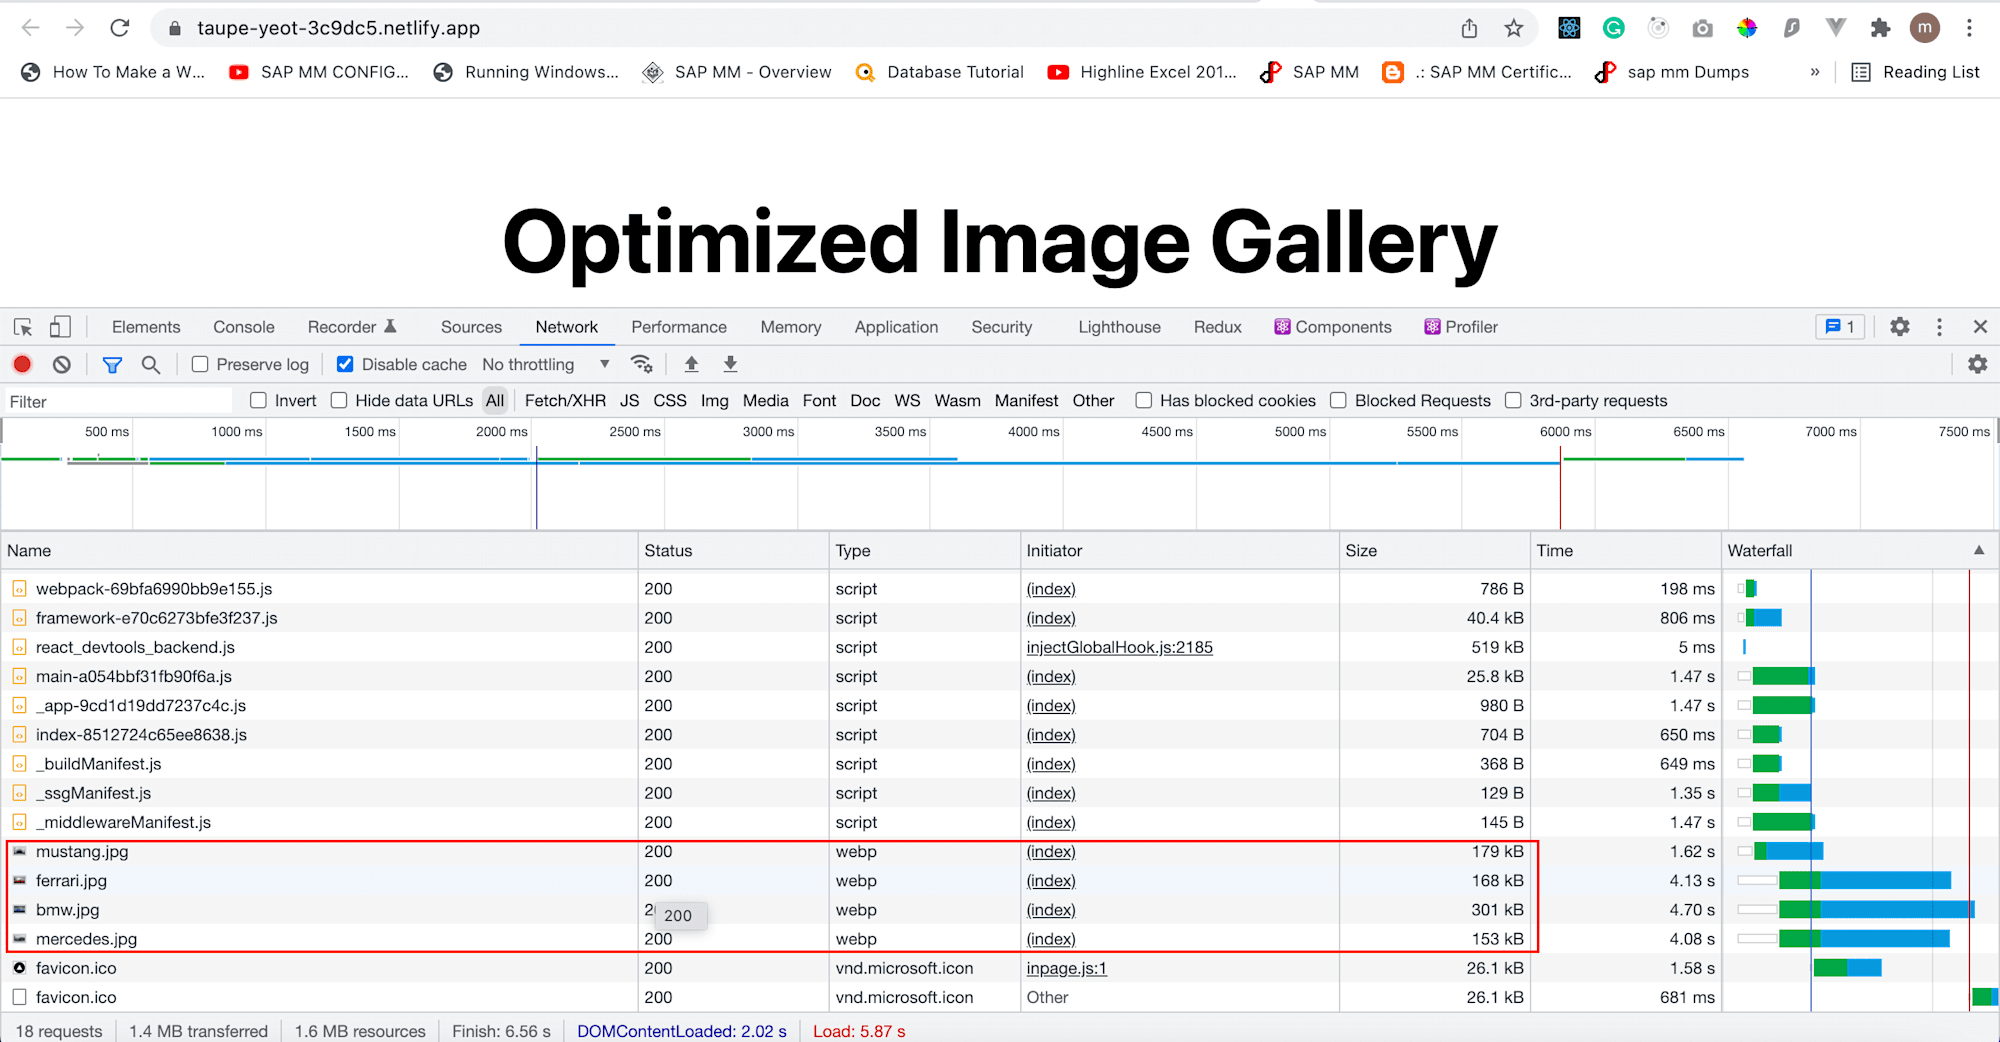 Optimized image size and format